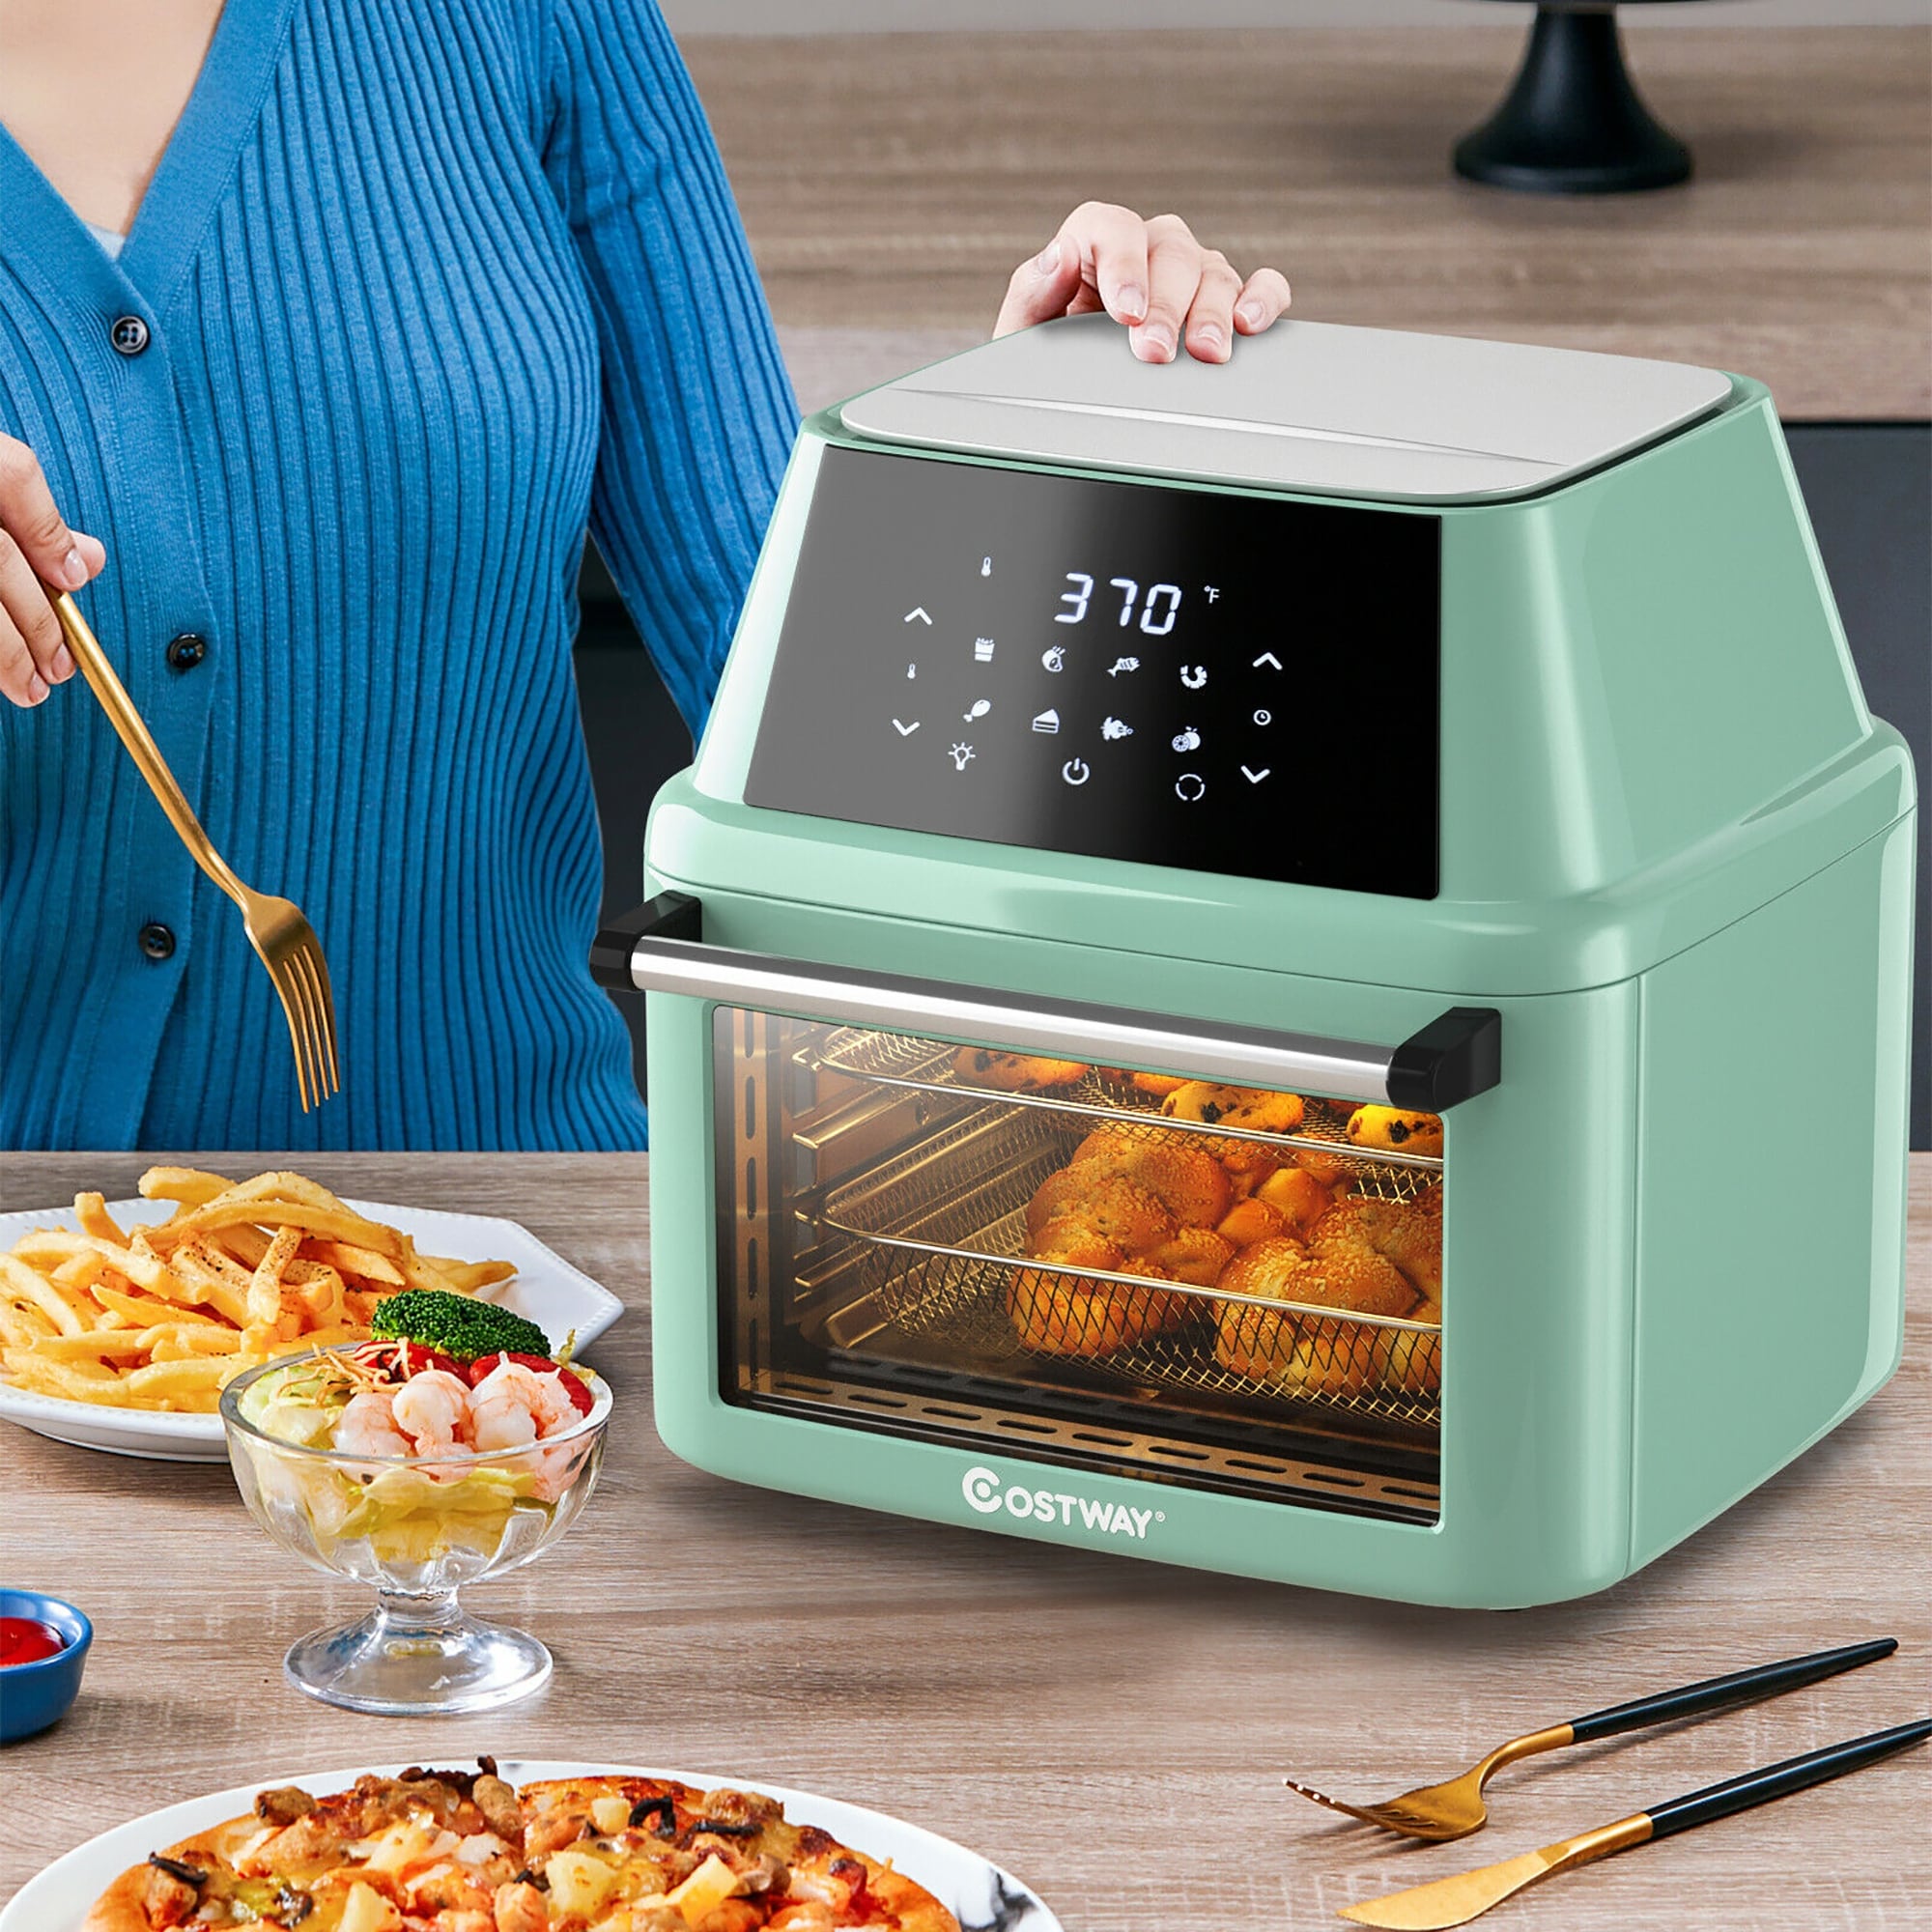 Costway 16-in-1 Air Fryer Oven 15.5 QT Toaster Oven Dehydrator